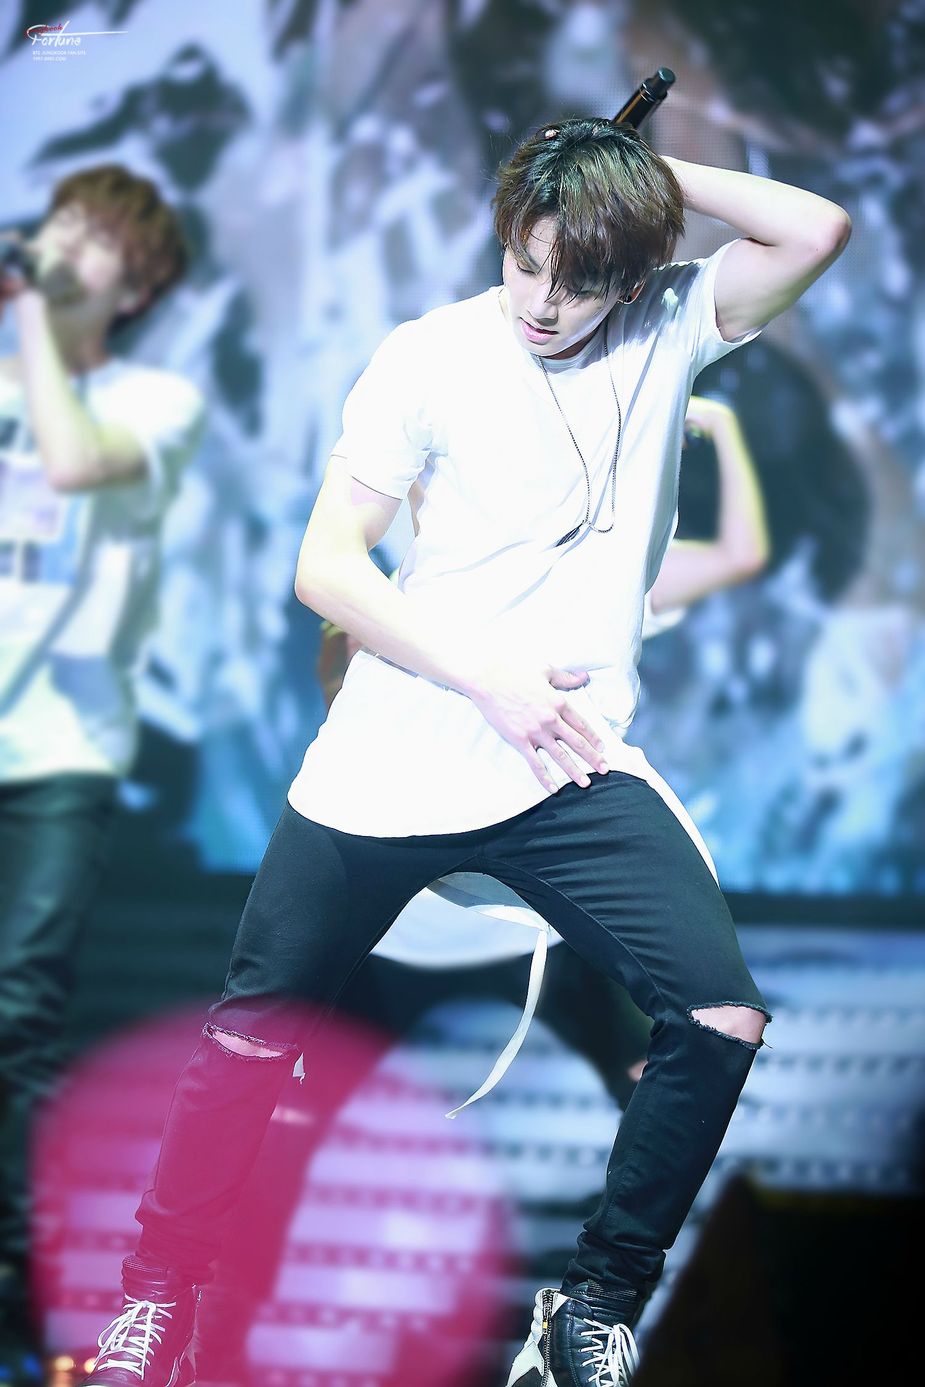 A look at Jungkook's thighs will definitely motivate you to work out. 